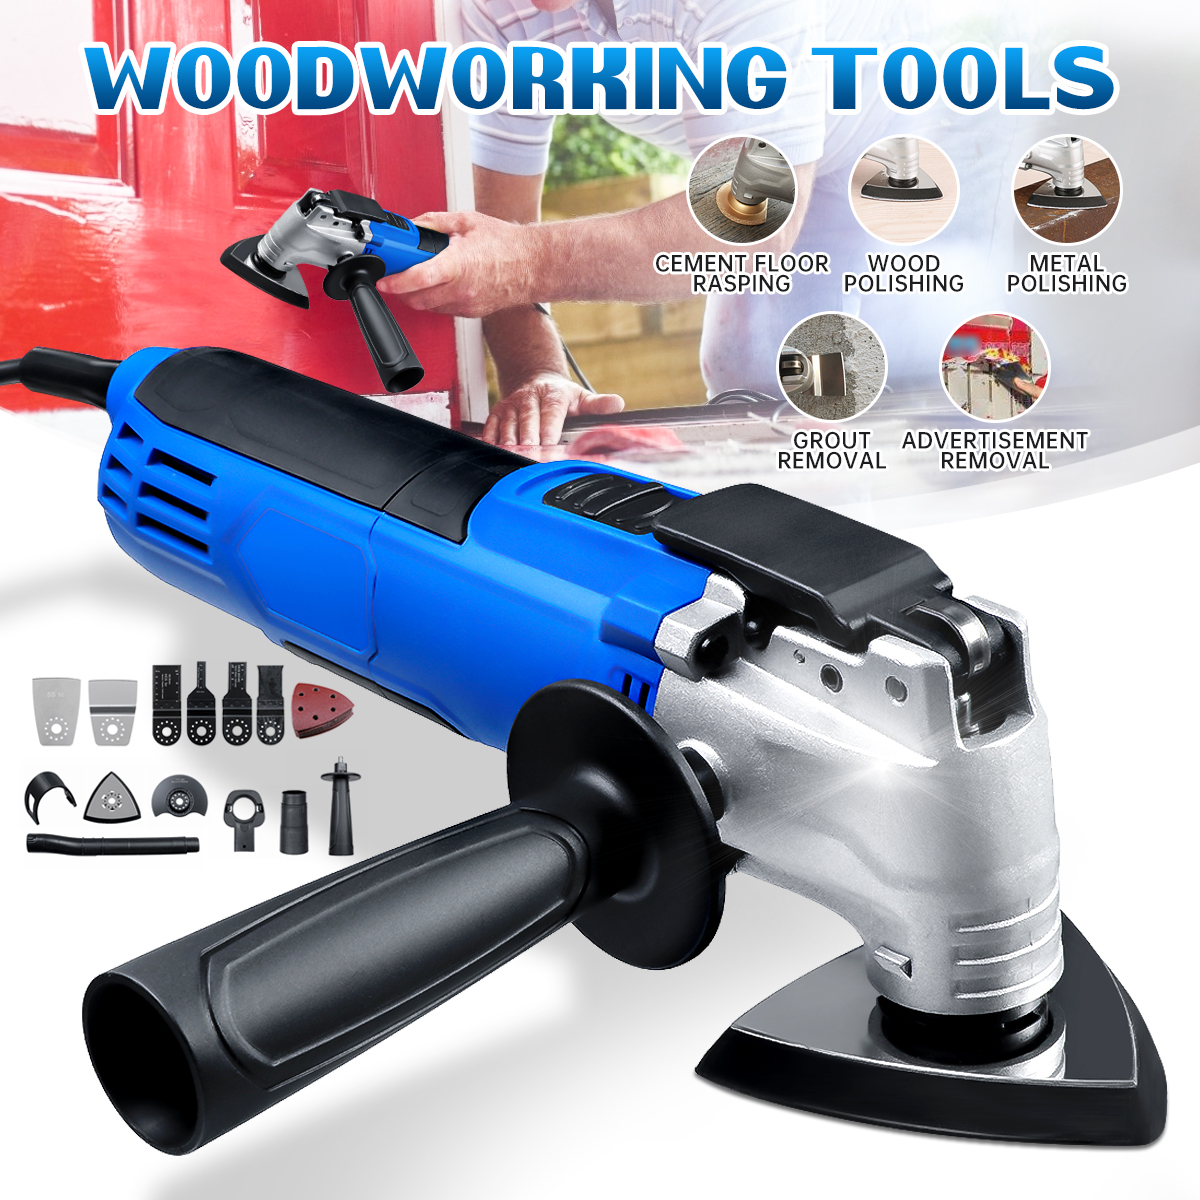 220V-Electric-Polisher-Cutter-Trimmer-Electric-Saw-Renovator-Tool-Woodworking-Oscillating-Tool-1800975-1